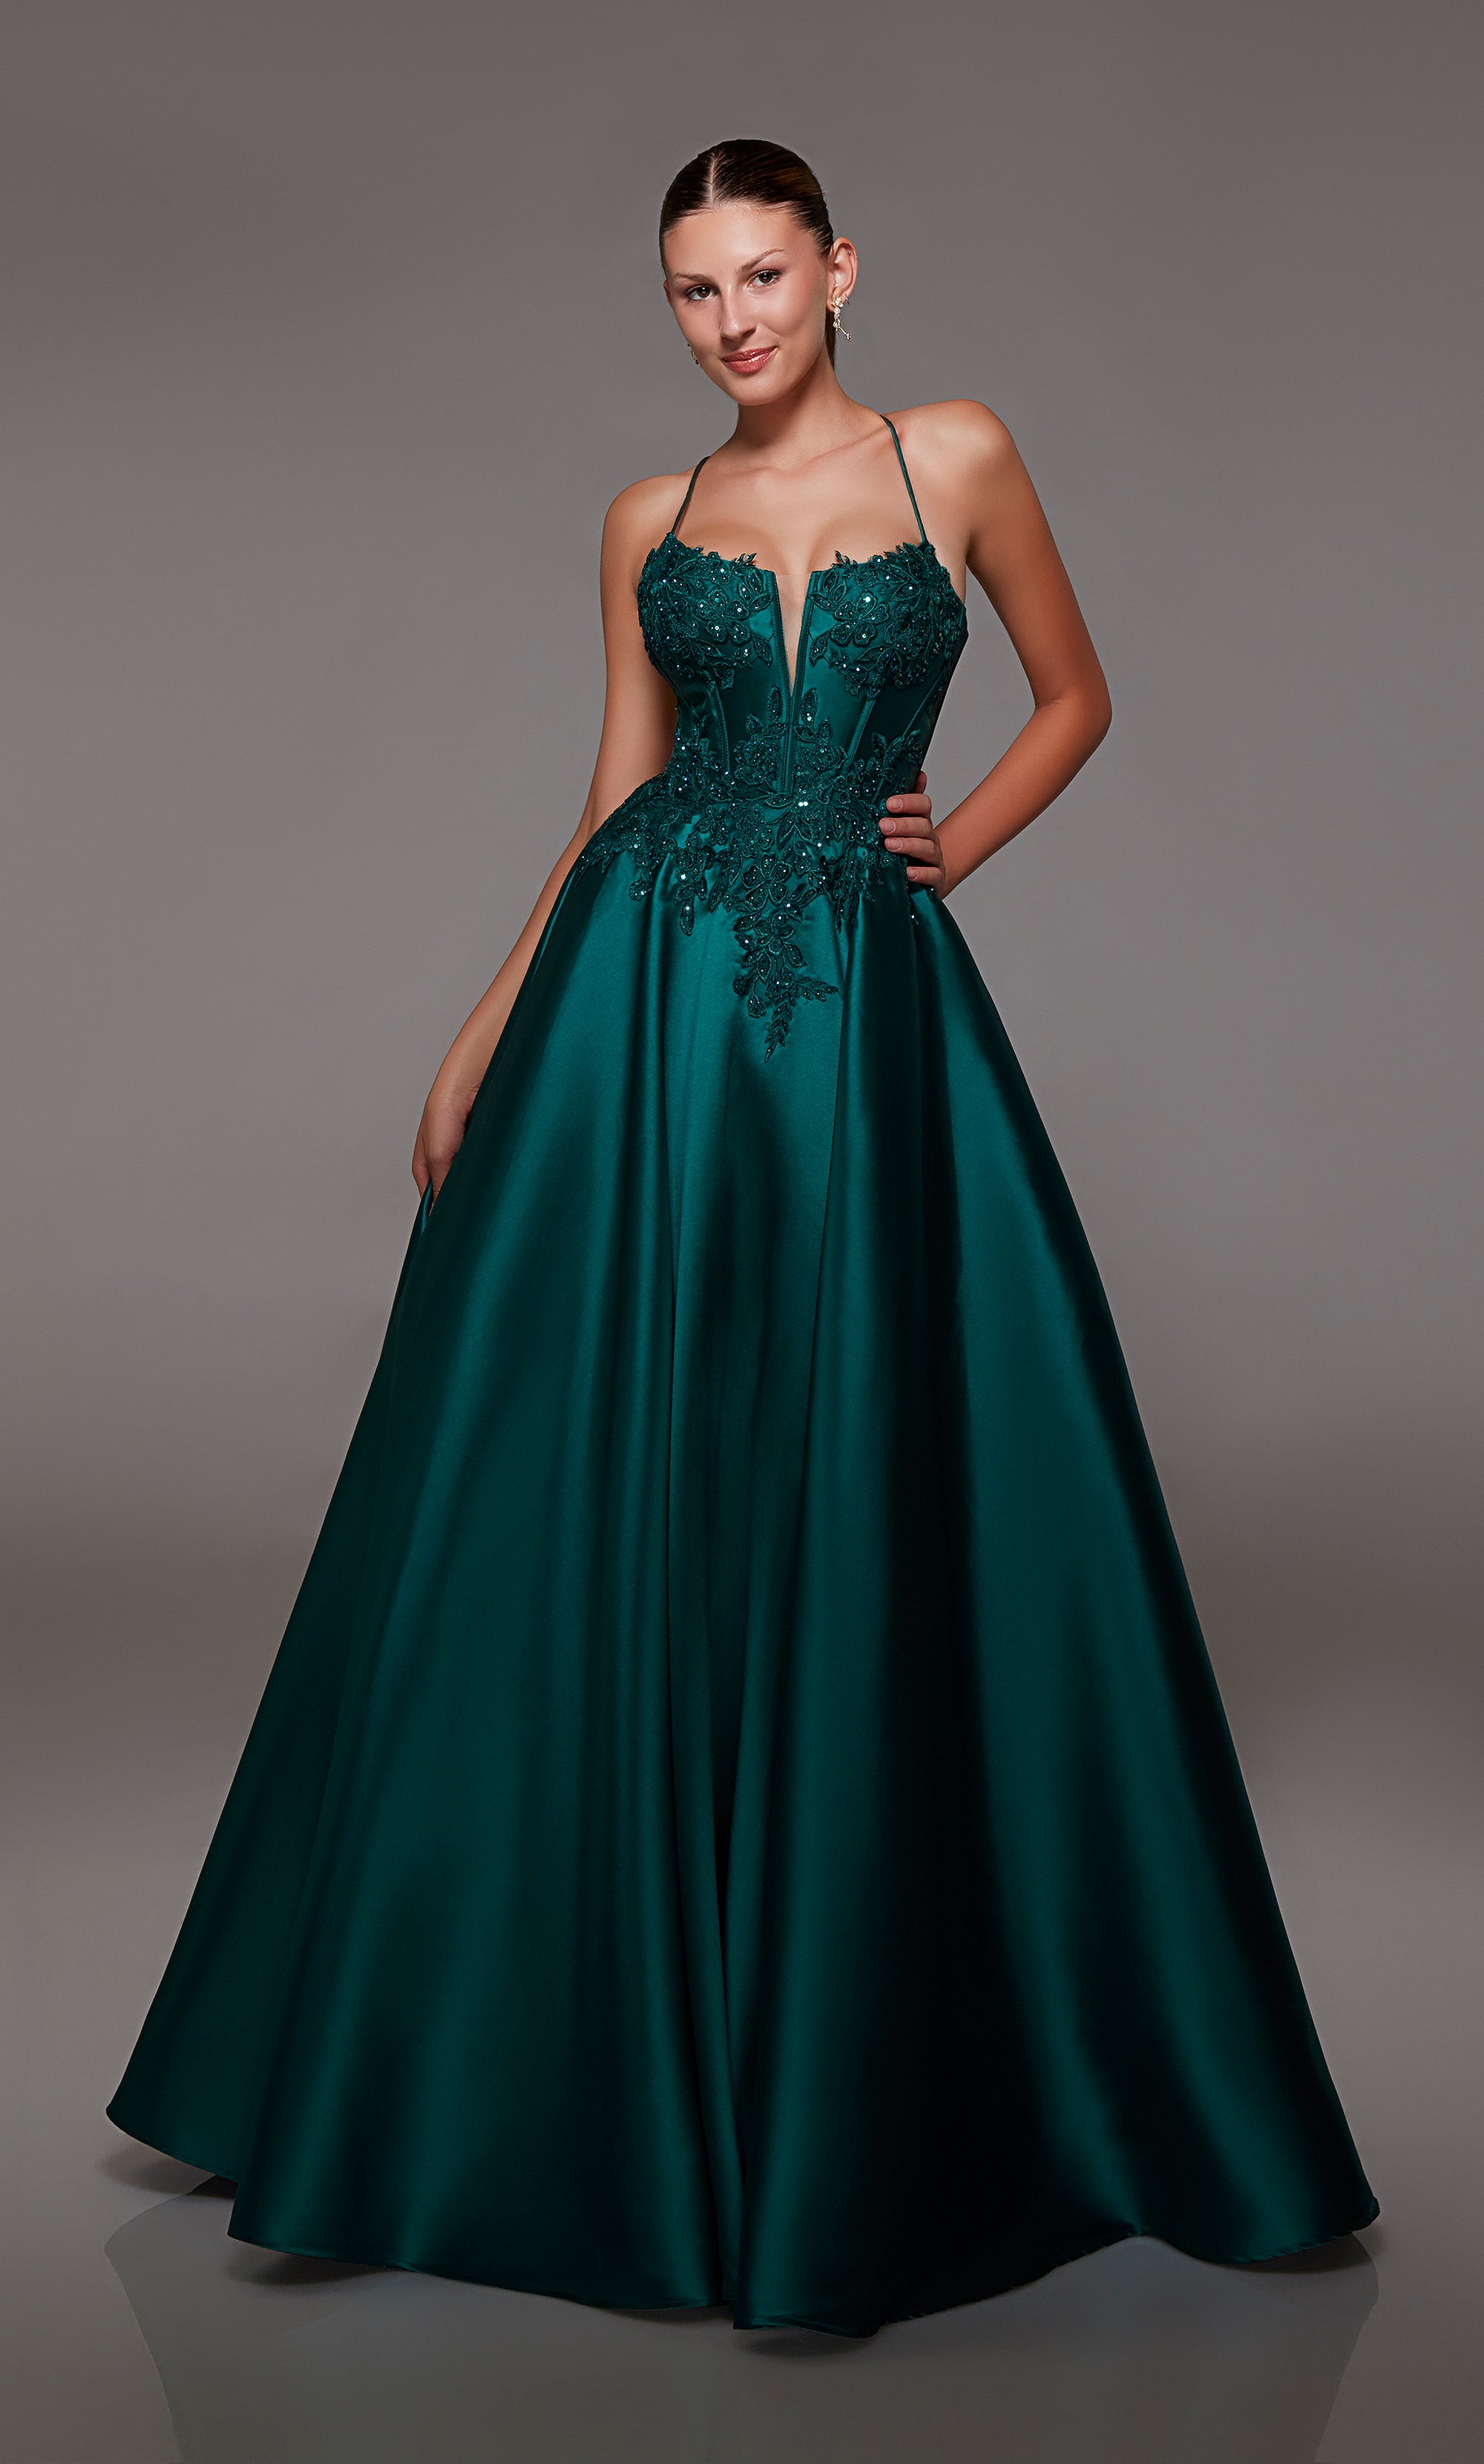 Pine green ball gown spotlighting an plunging corset bodice with beaded floral lace appliques and an strappy lace-up back for an enchanting and stylish look.